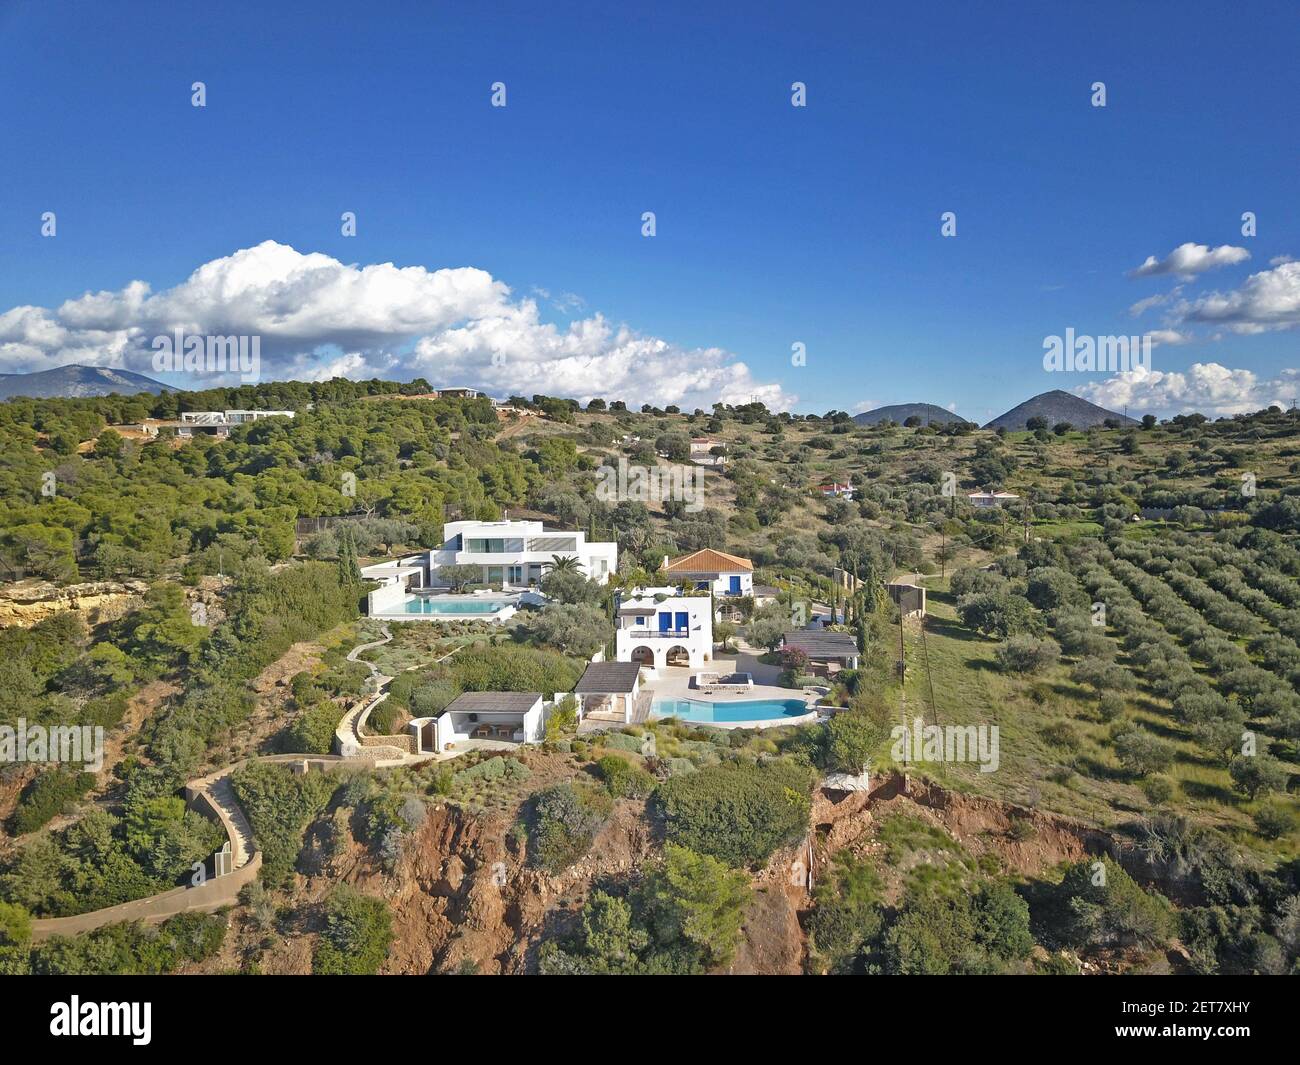 Greek holiday villa of aprox 4.5 million euro of Dutch King  Willem-Alexander and Queen Maxima in Kranidi, Doroufi at the gulf of  Argolis in Greece on December 21, 2018. The villa is